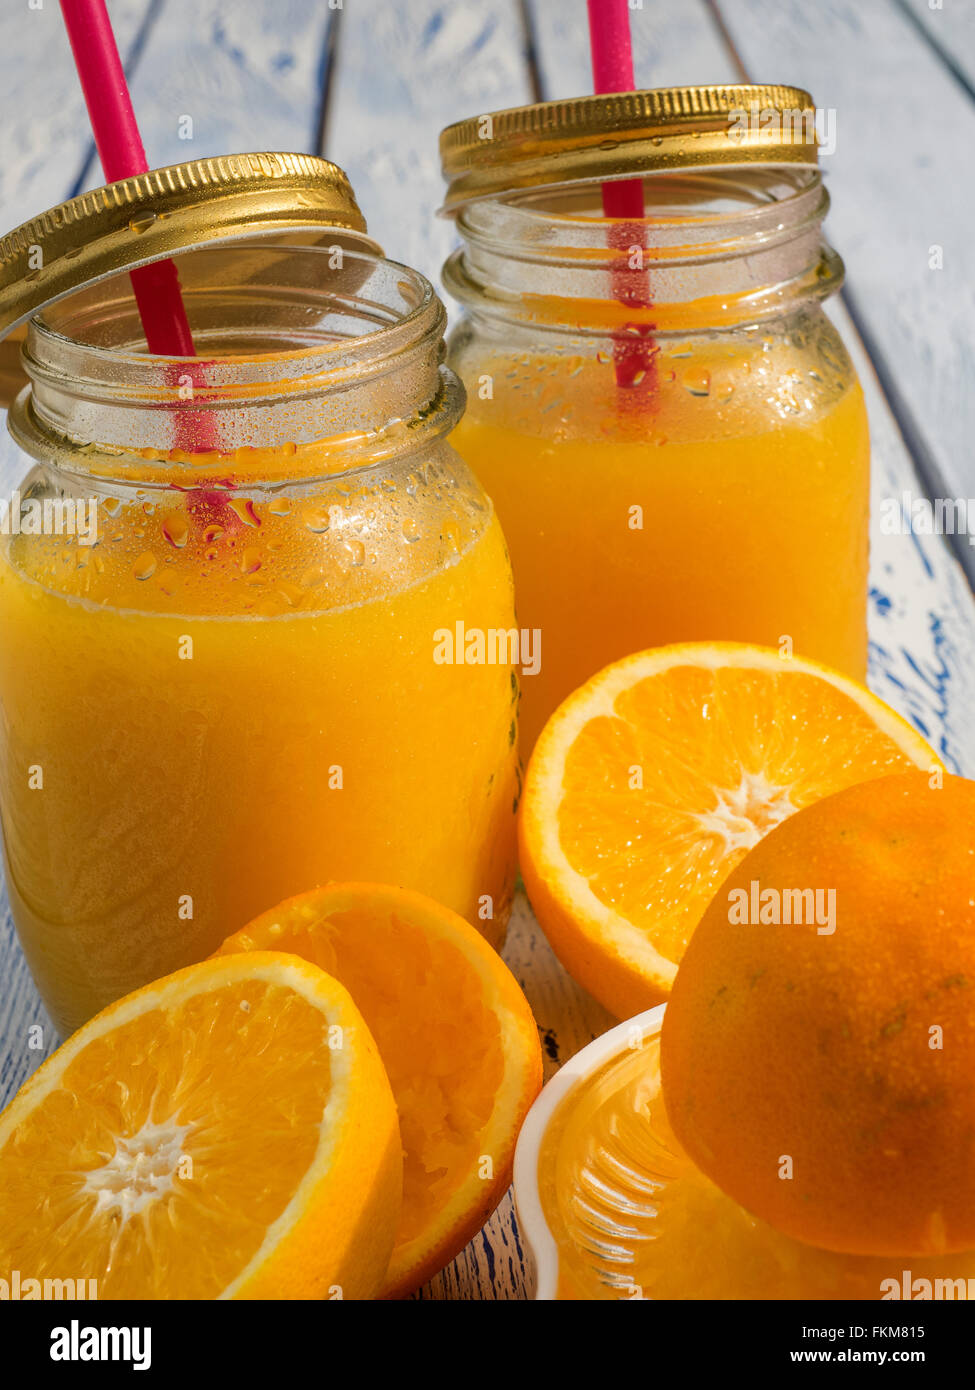 Orange juice in glass on a wooden table Stock Photo